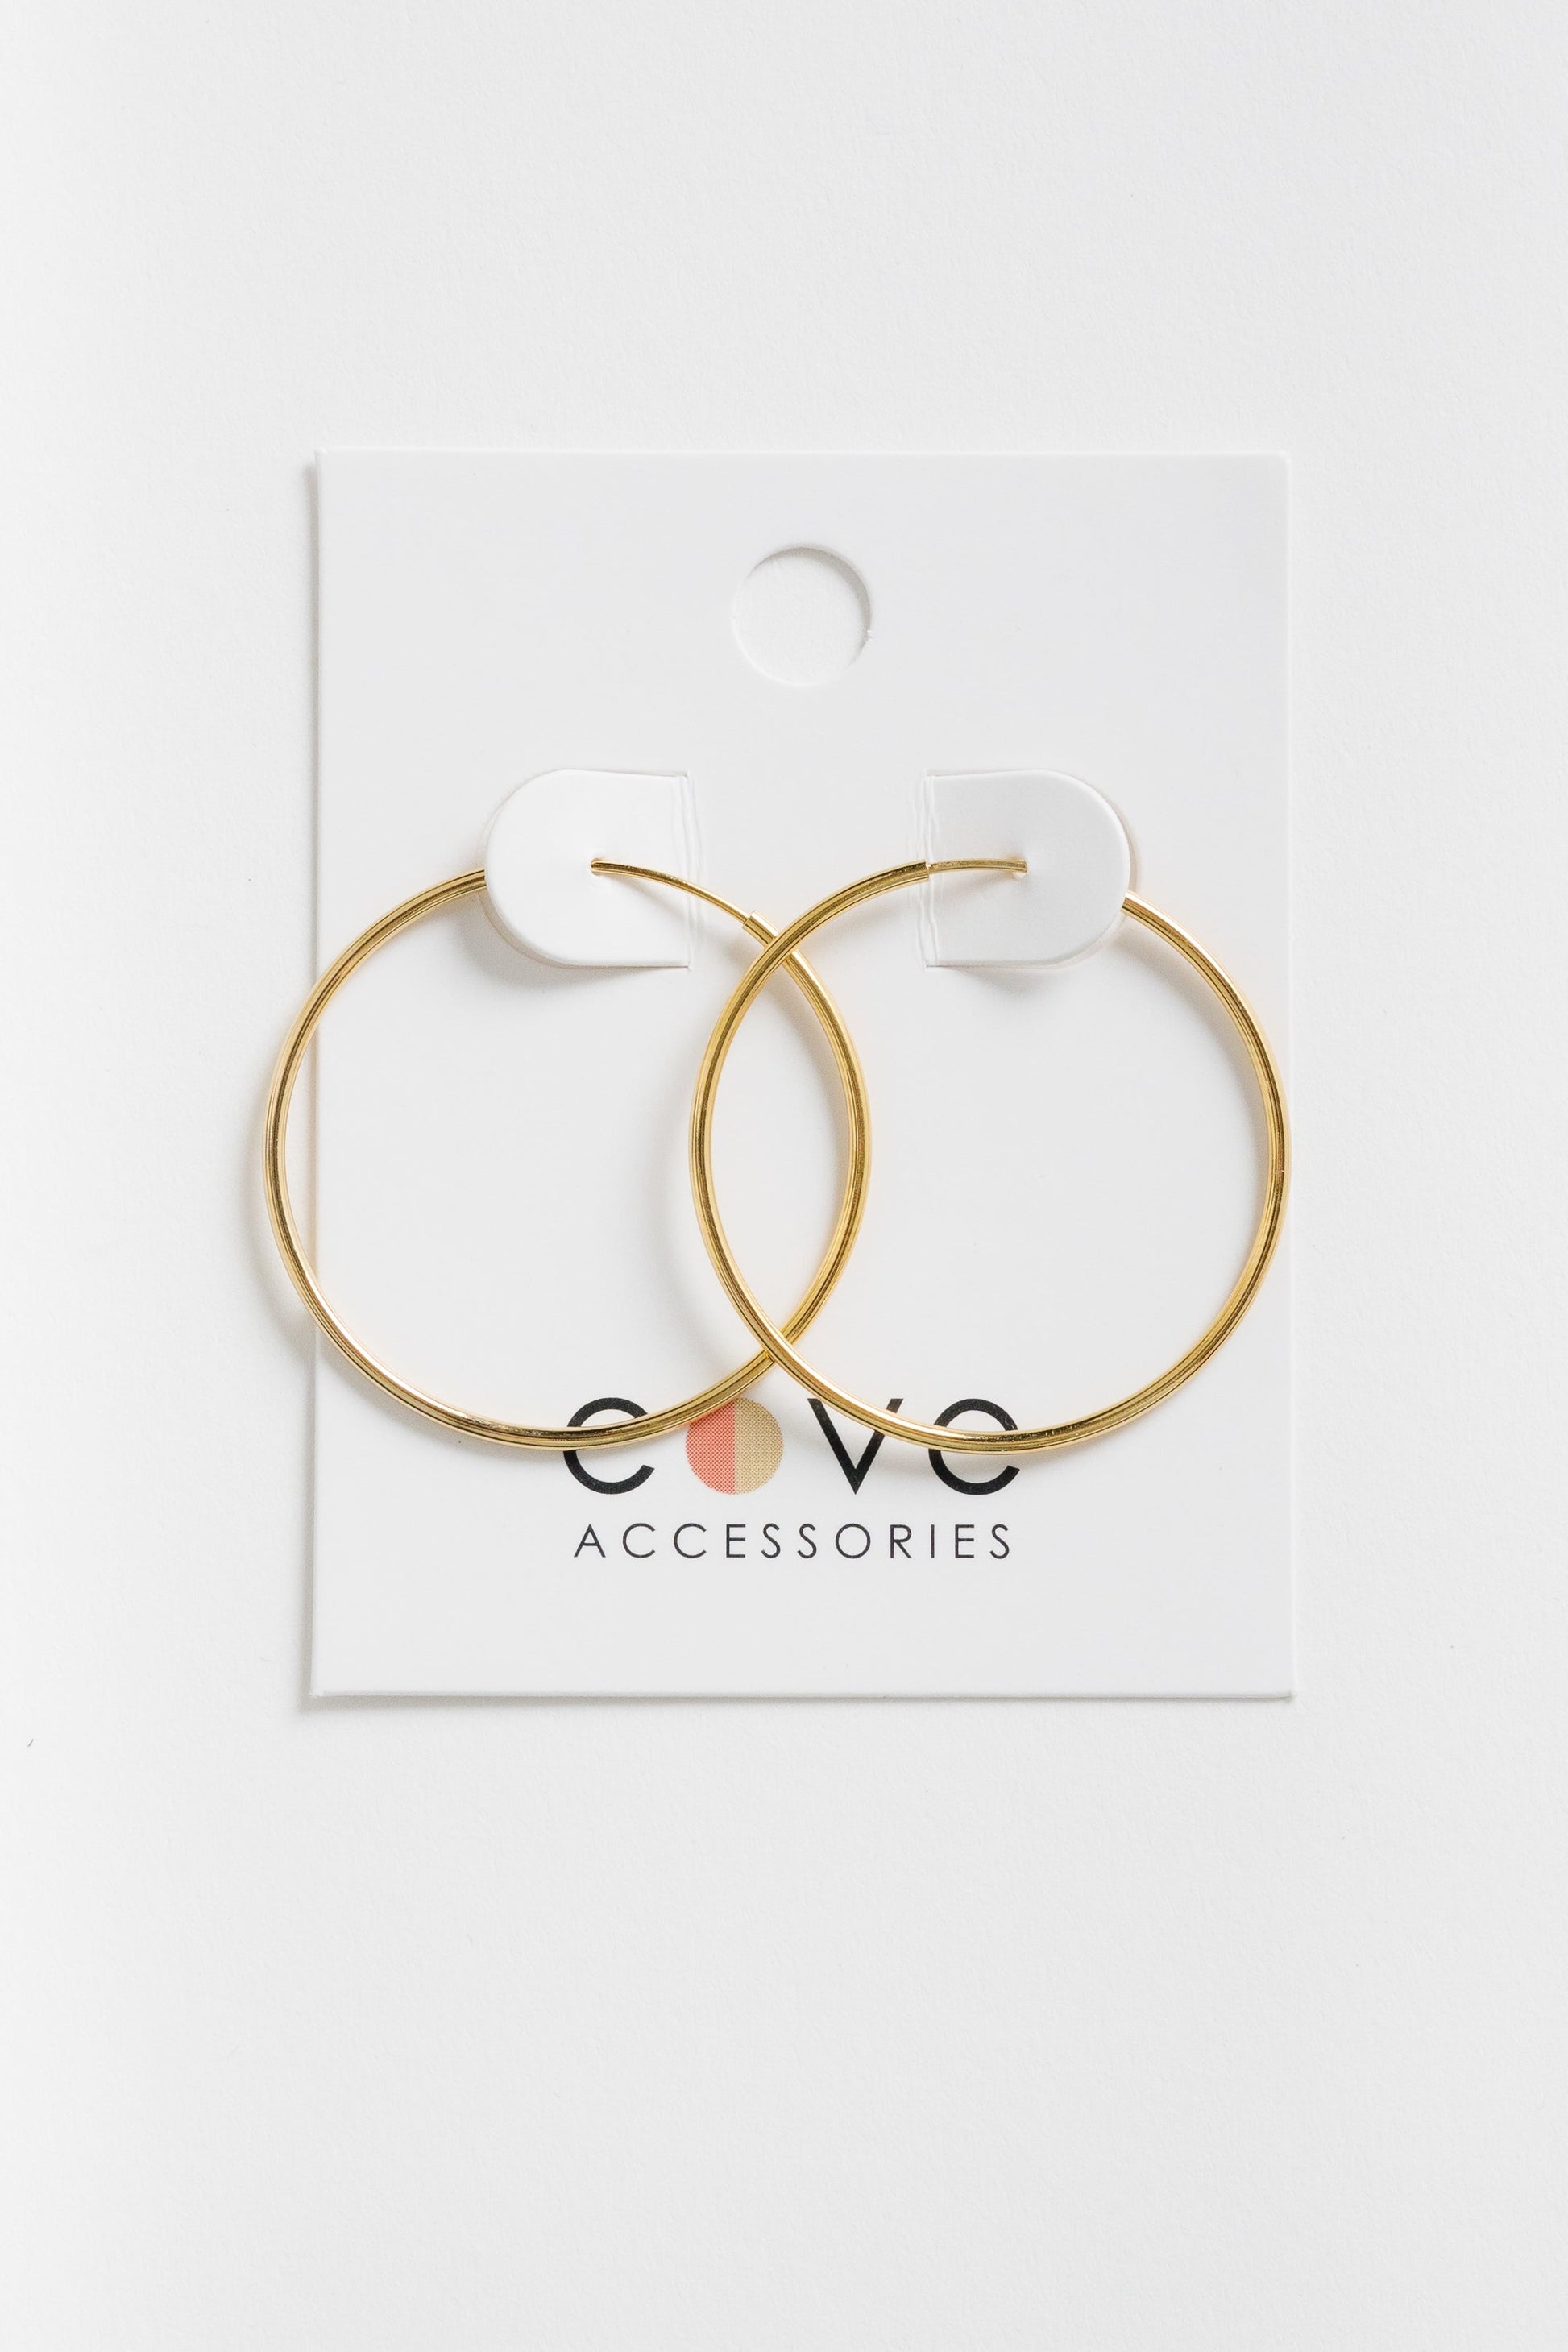 Cove Everyday Hoops WOMEN'S EARINGS Cove Accessories Gold 1.18" Rnd 